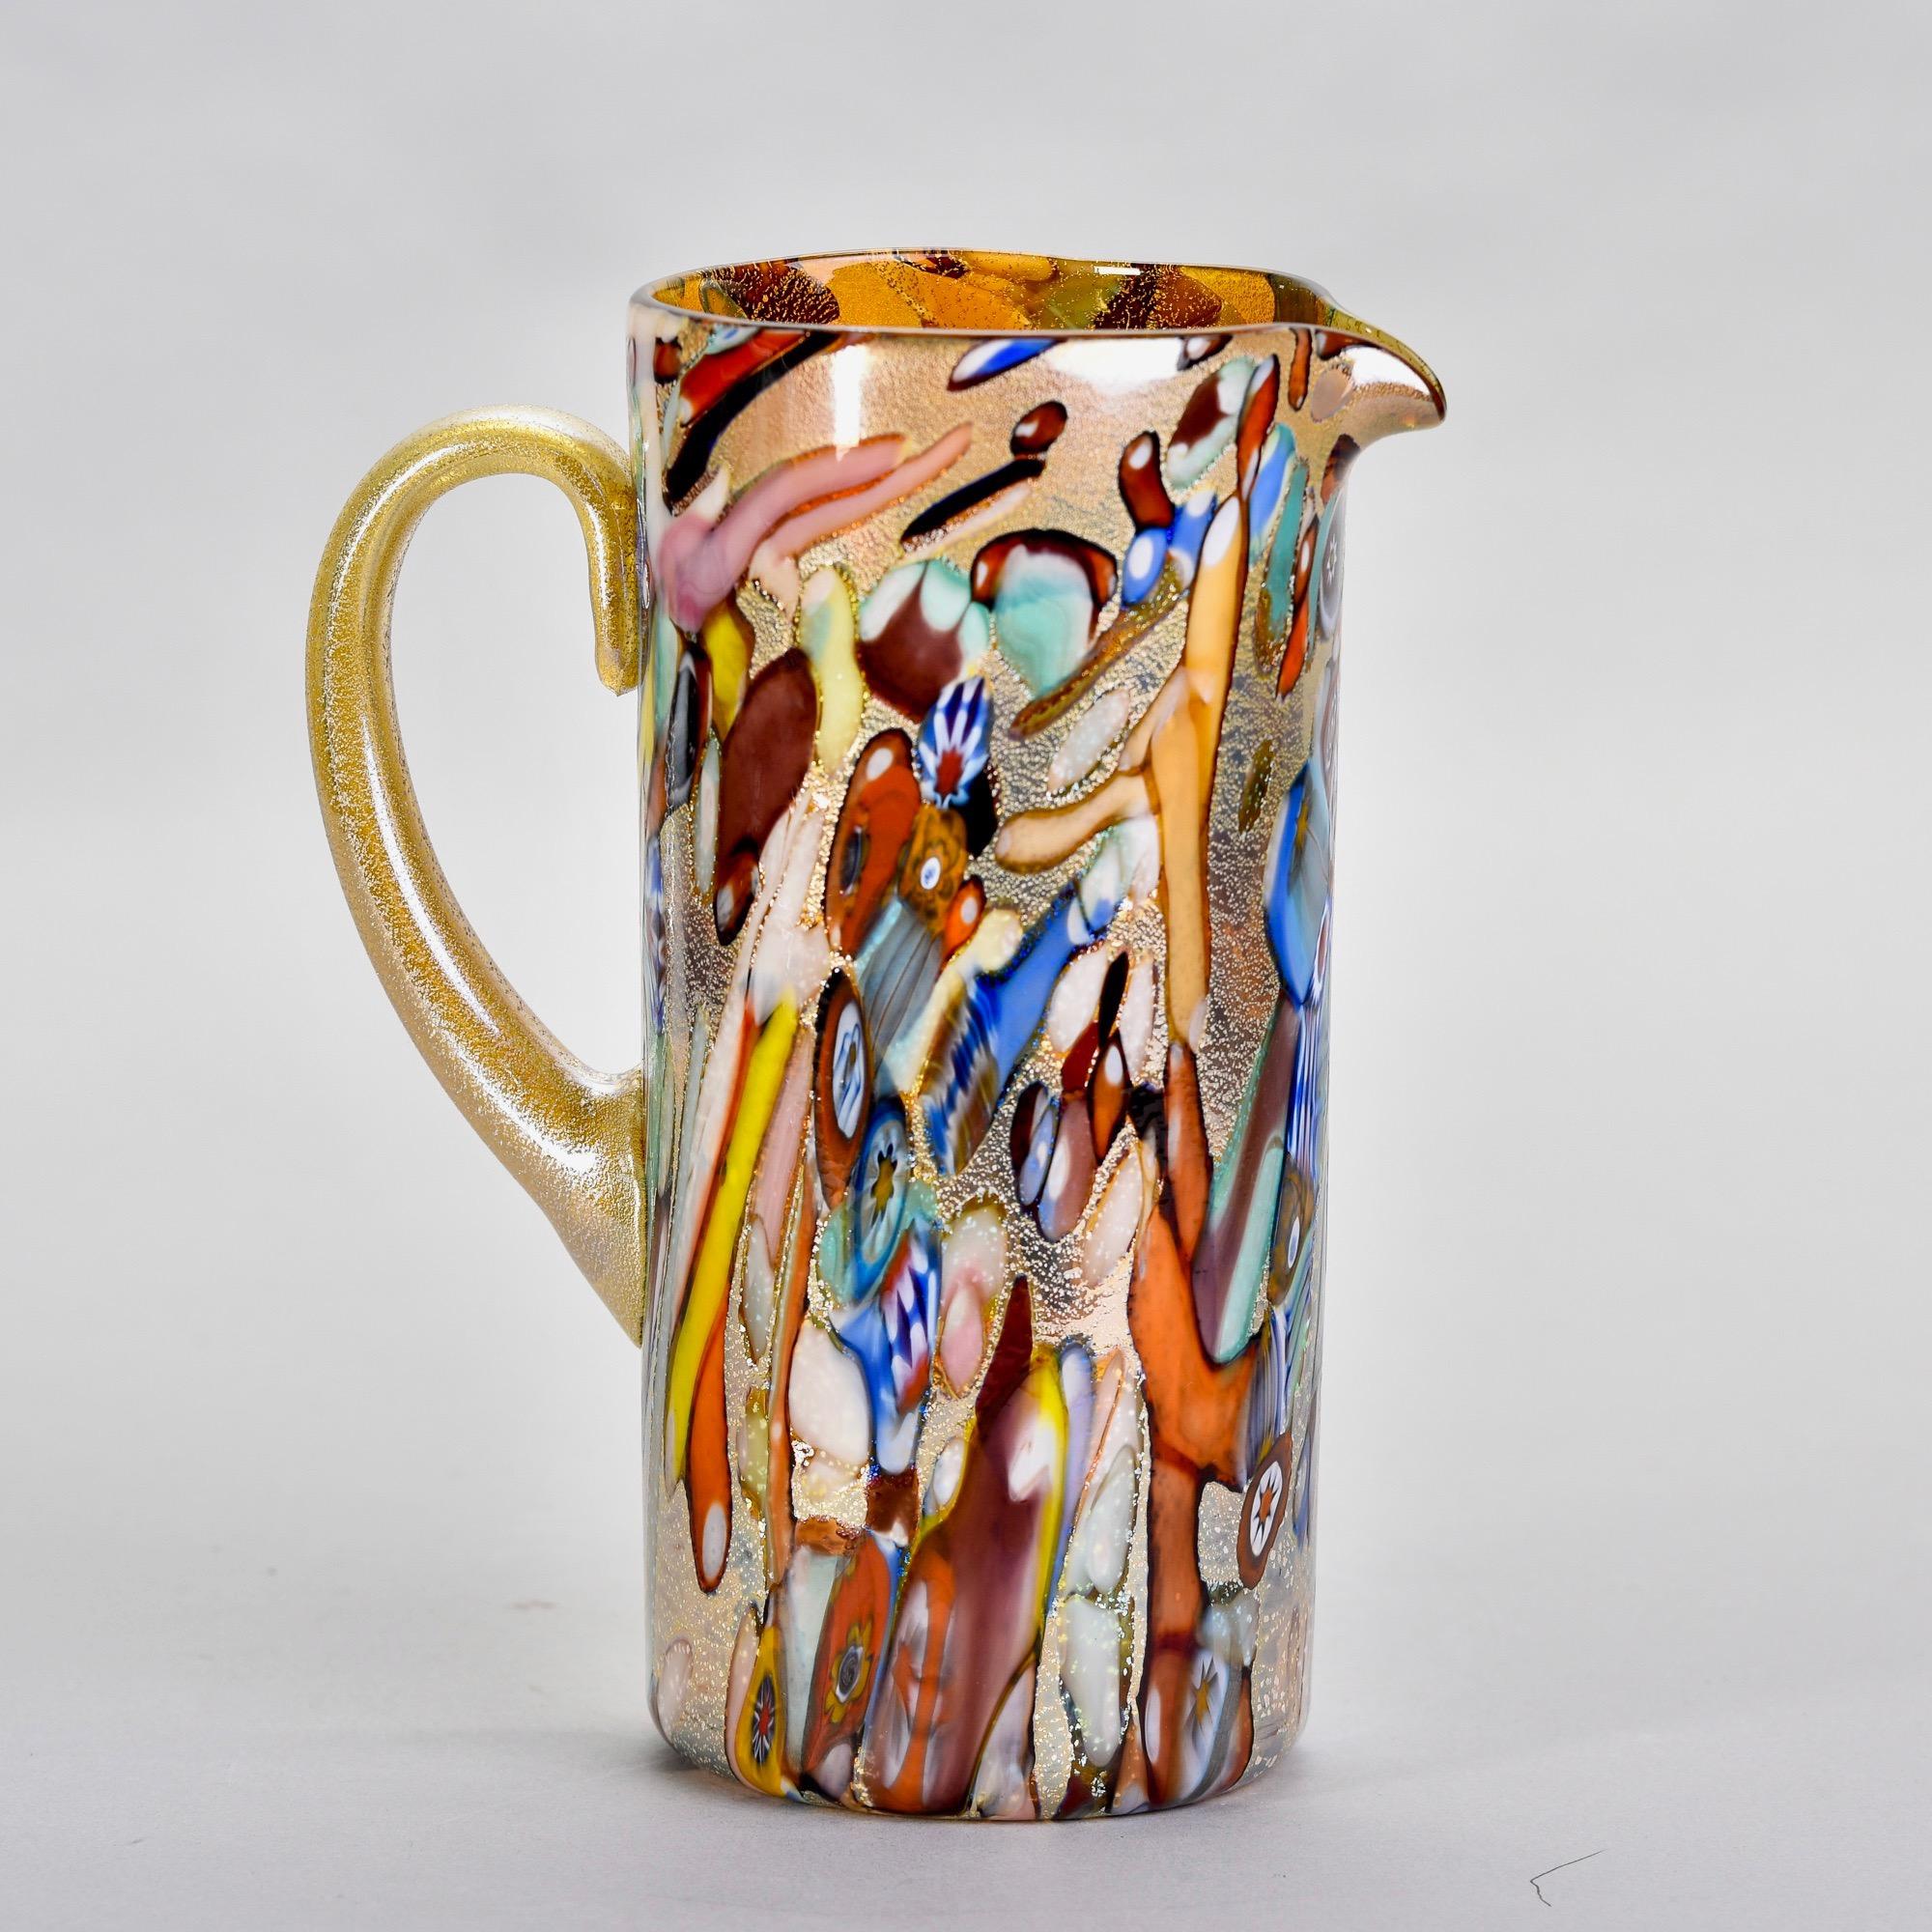 Found in Italy, this new Murano glass pitcher has an iridescent pale gold body with streaks of orange, blue white, red and some scattered murrine flowers. Unknown maker. Versatile, decorative vessel than can be used as a vase or as intended. Unknown